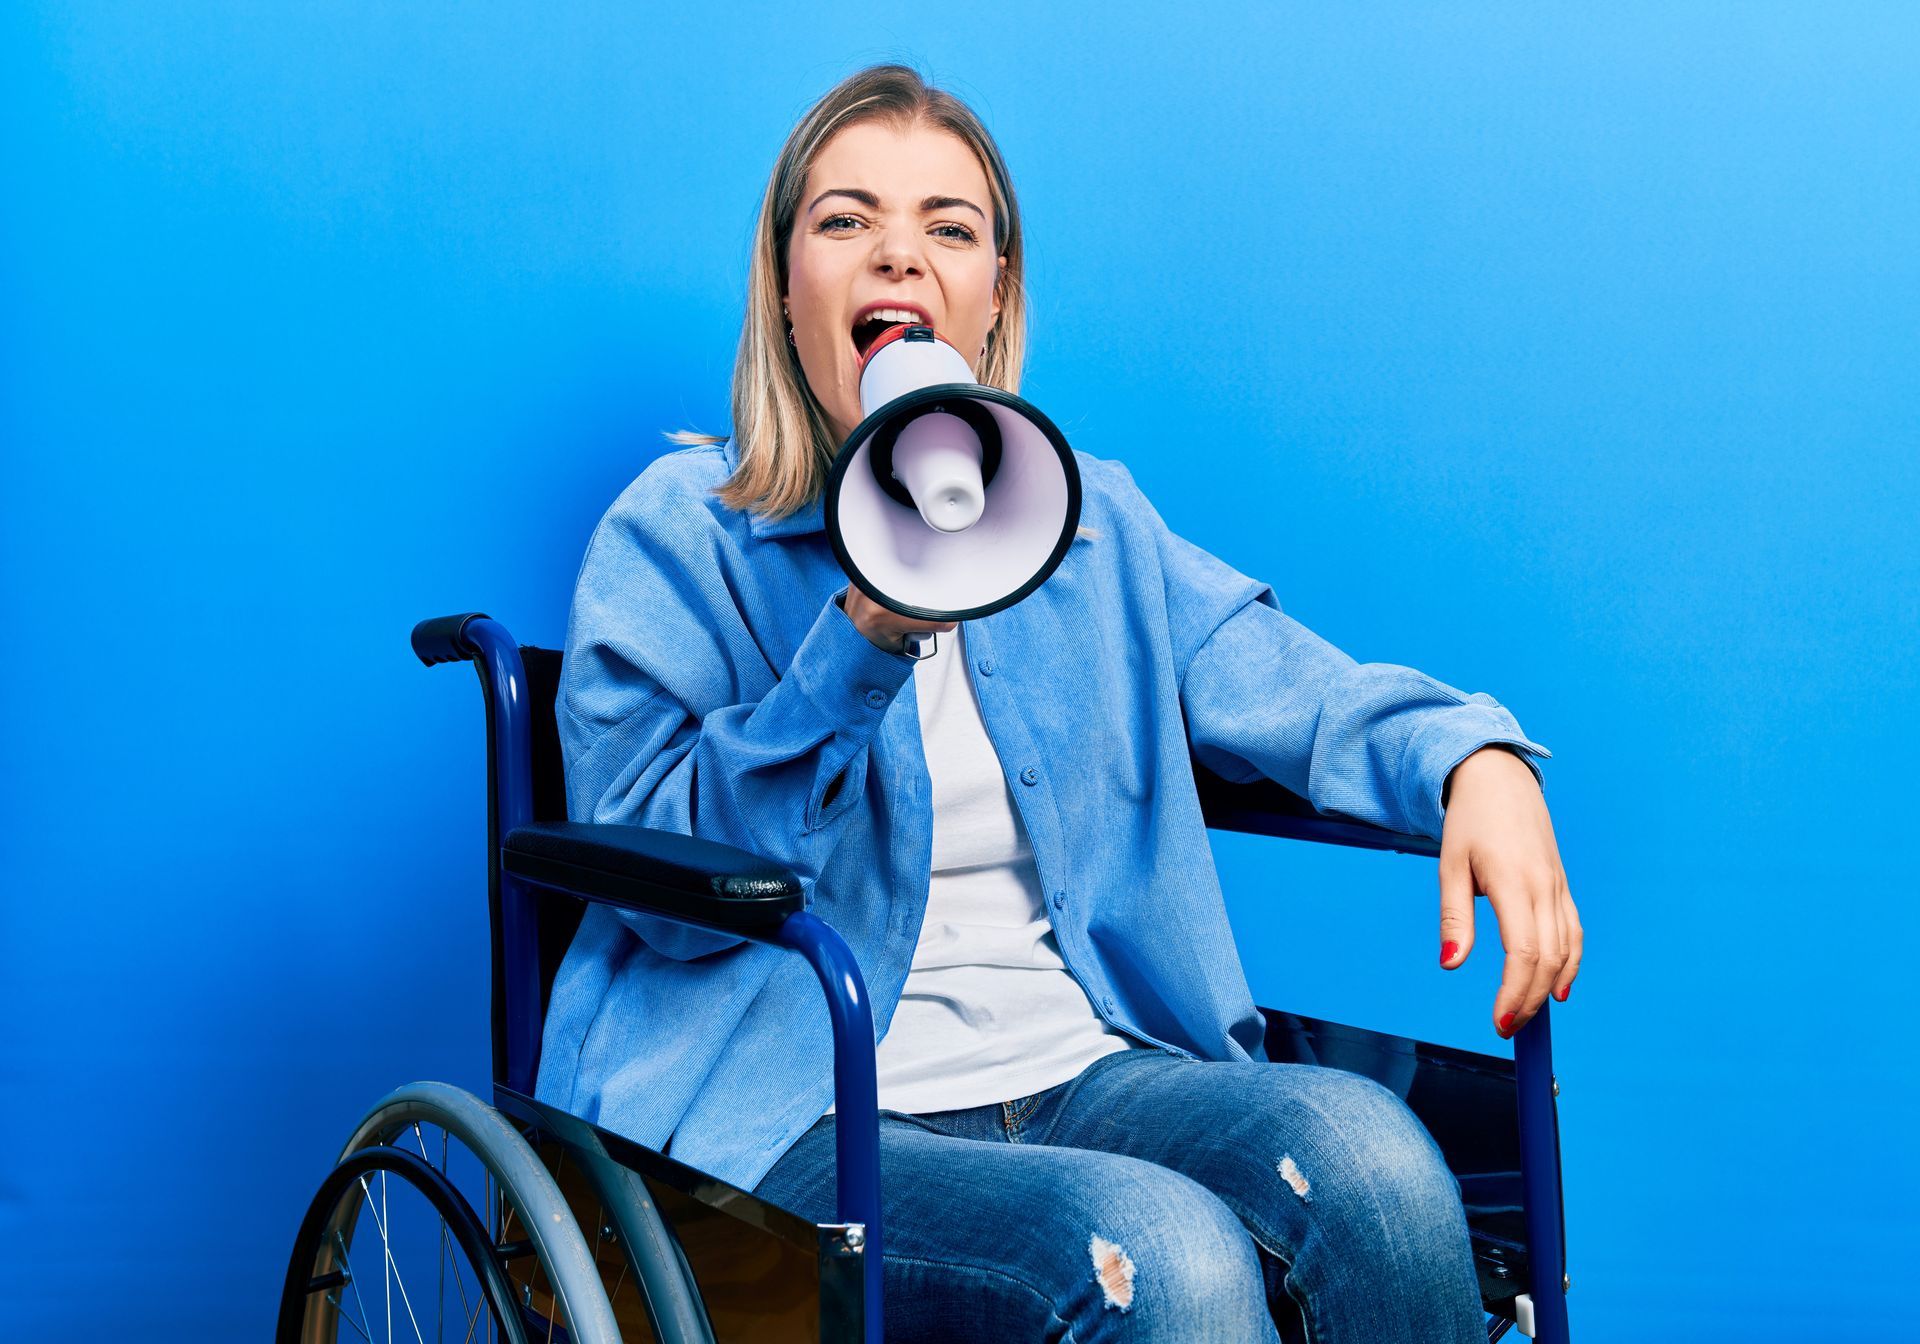 A woman in a wheelchair shouts into a megaphone, expressing her views with enthusiasm.